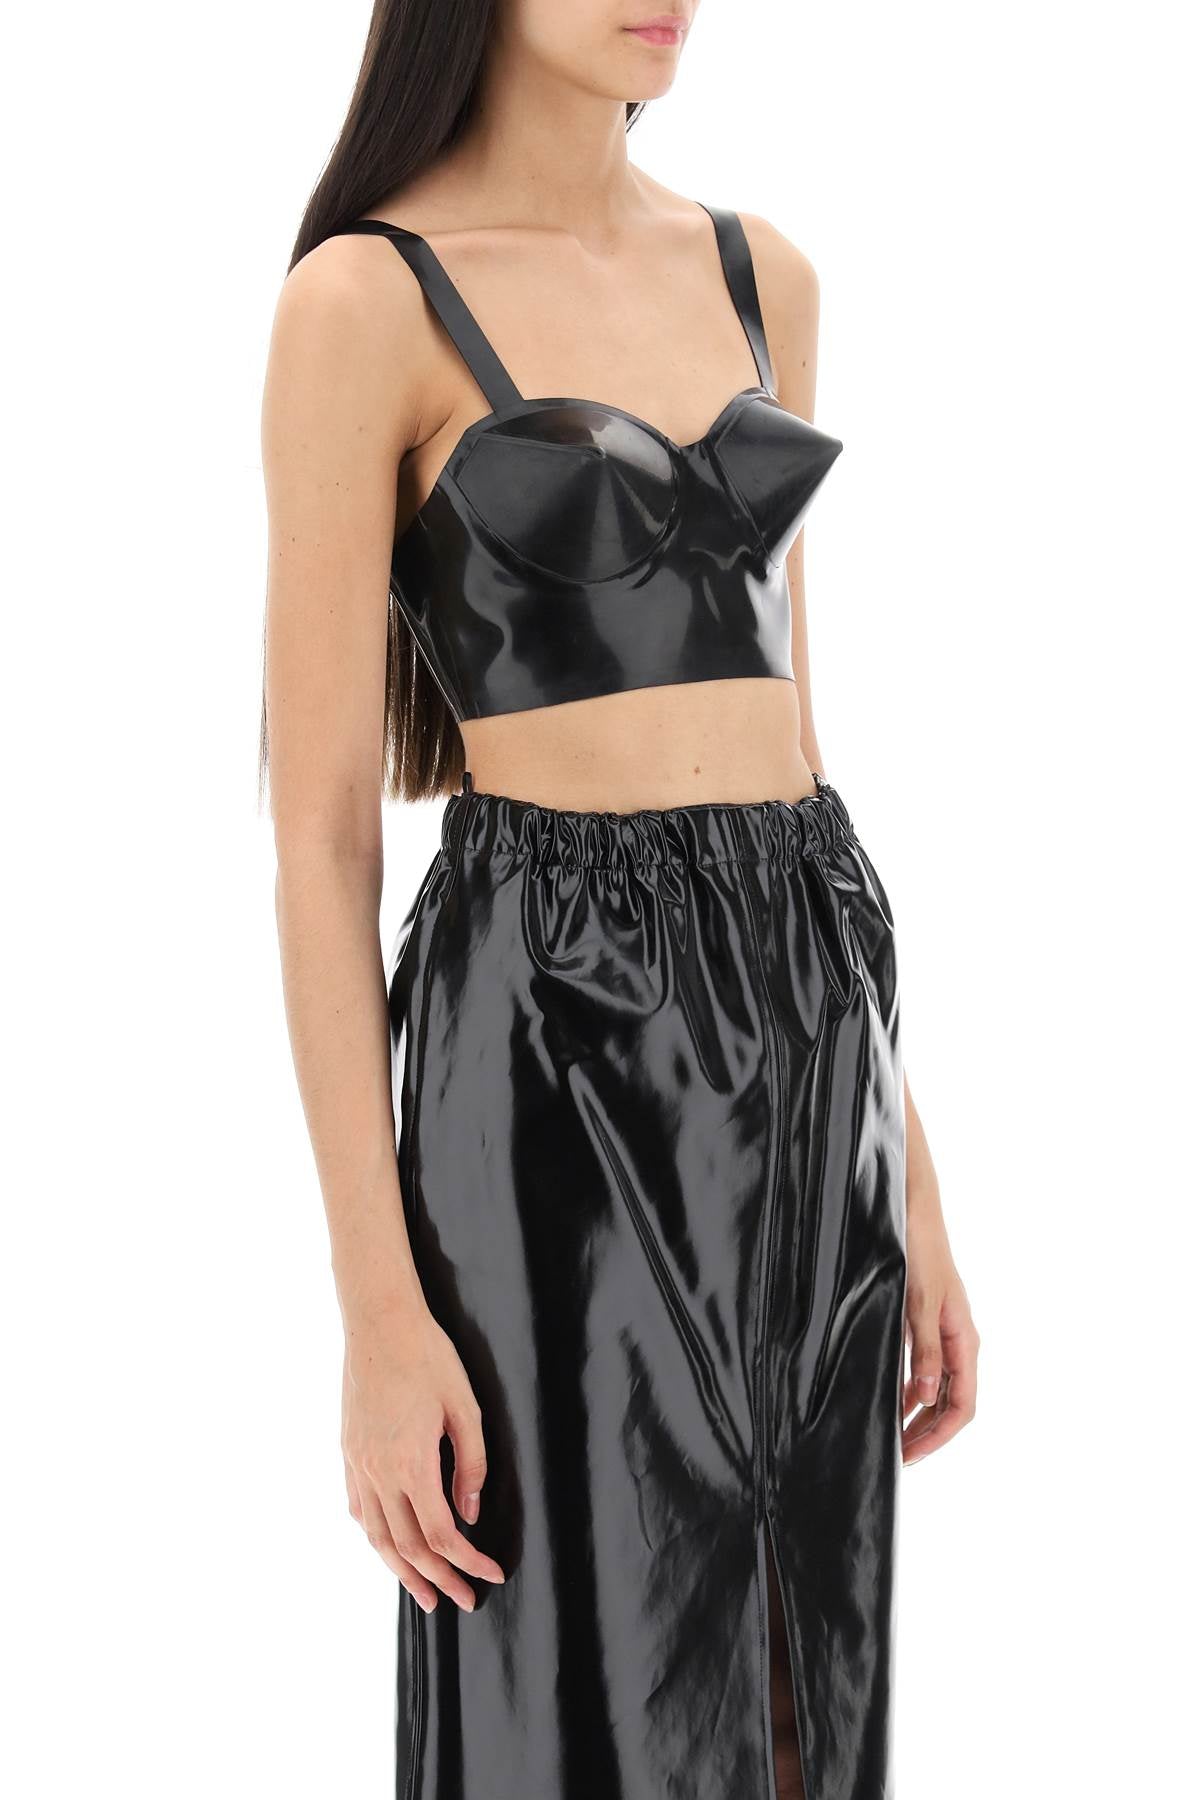 Maison margiela latex top with bullet cups-1